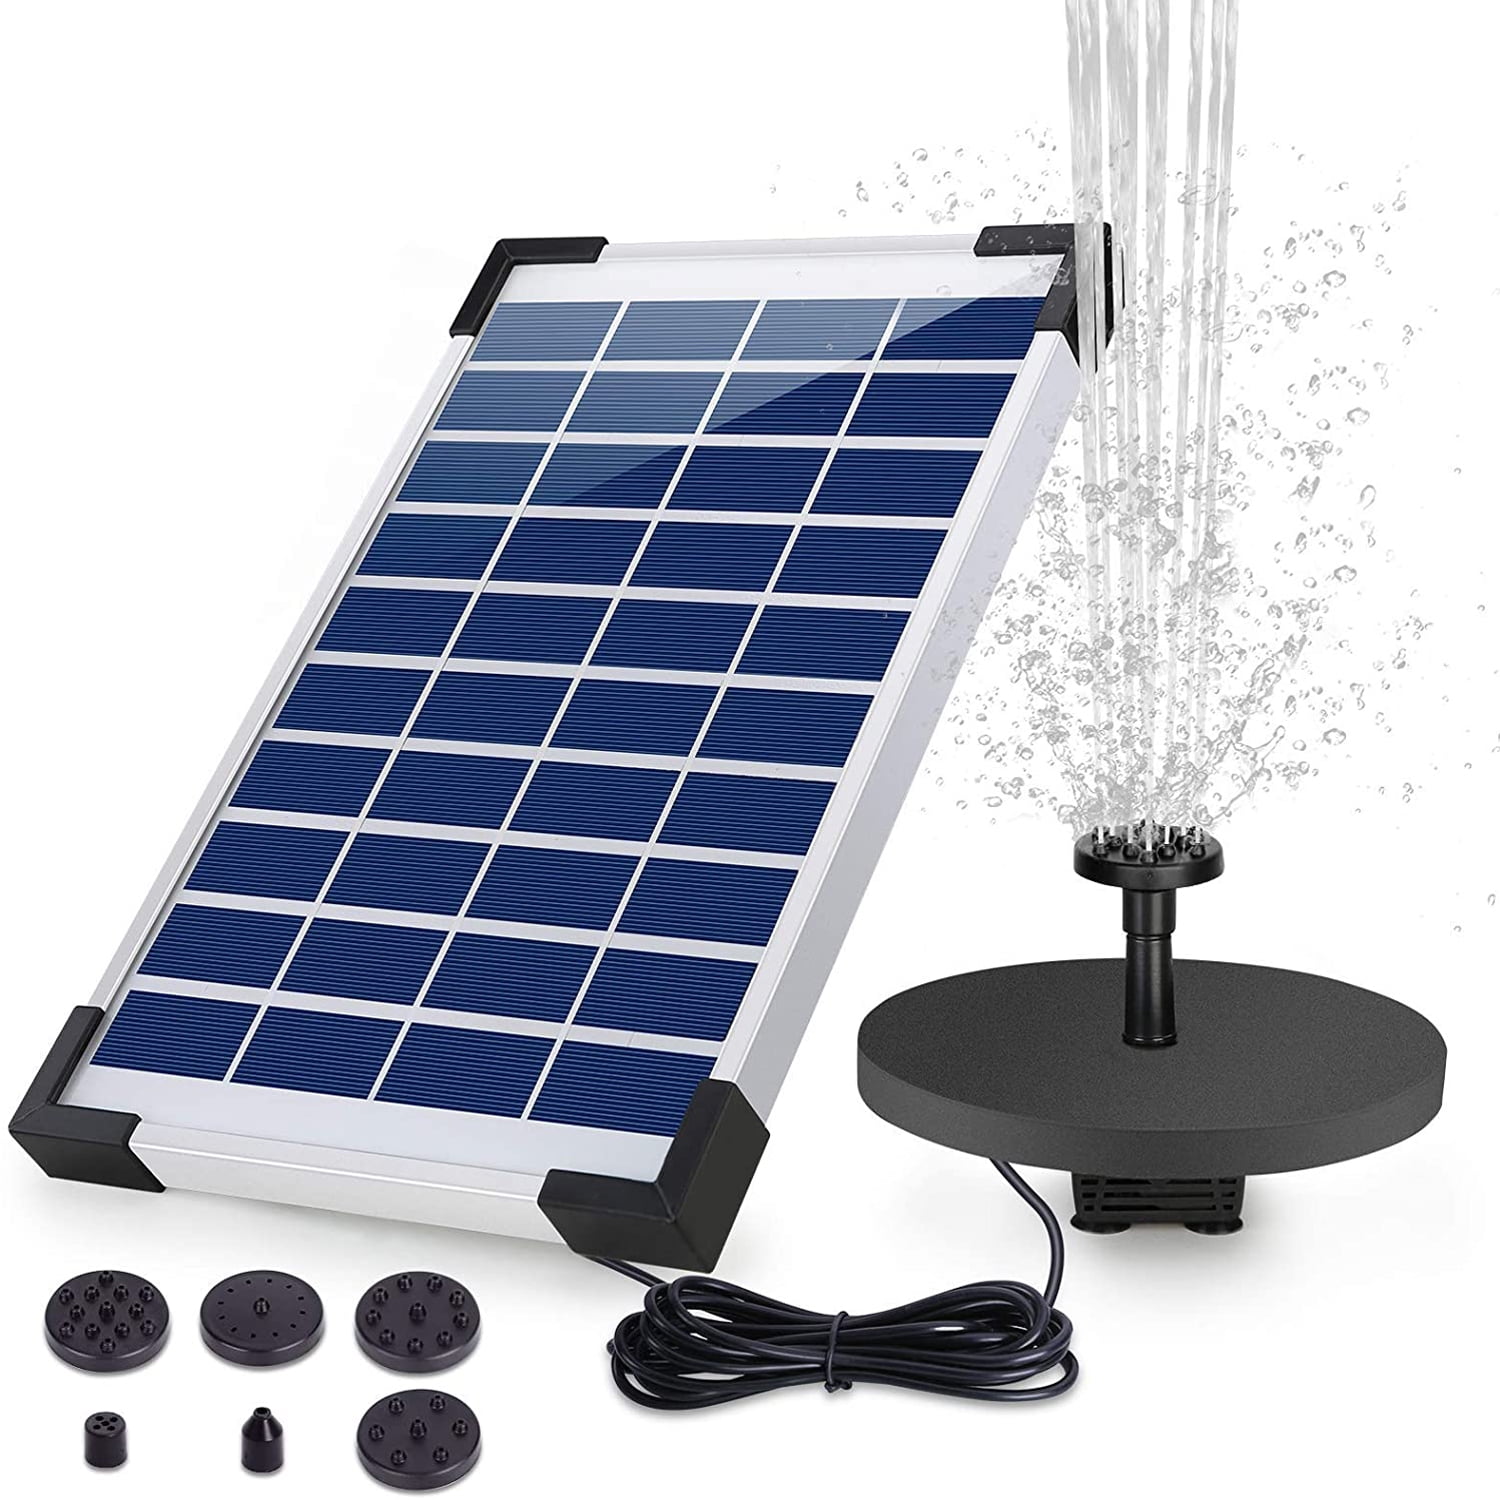 10ft High Lift Solar Fountain Pump 3.5W Solar Water Pump Floating Fountain Built-in 1800mAh Battery LED Lights Pond or Garden Decoration with 7 Nozzles for Bird Bath Filtration Box Fish Tank